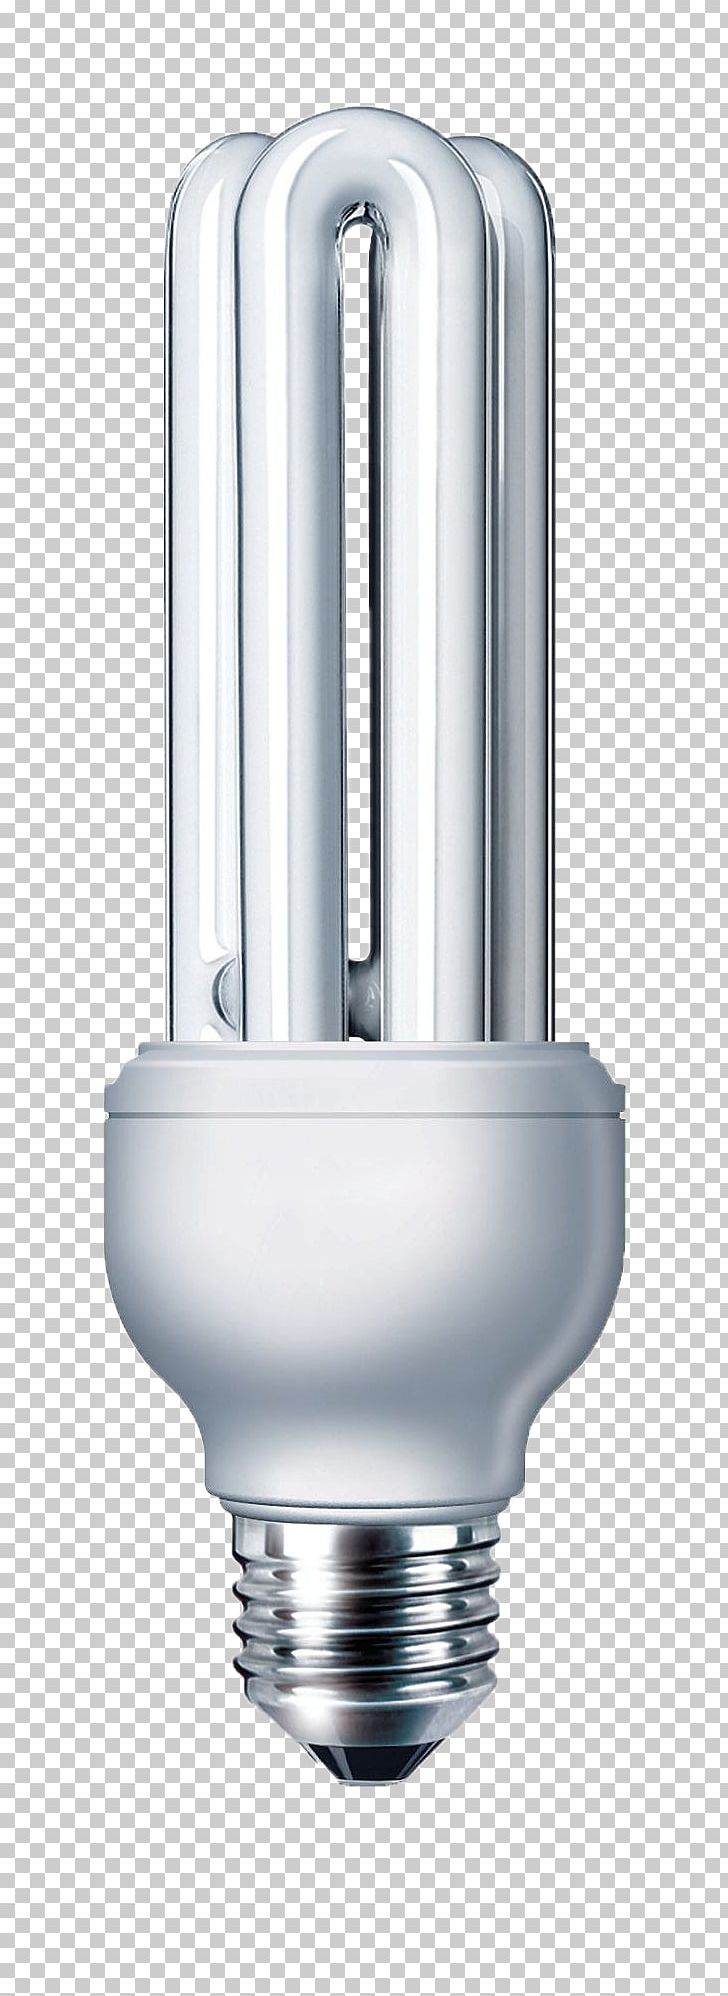 Incandescent Light Bulb Compact Fluorescent Lamp Philips Lighting PNG, Clipart, Angle, Bulb, Bulbs, Christmas Lights, Edison Screw Free PNG Download